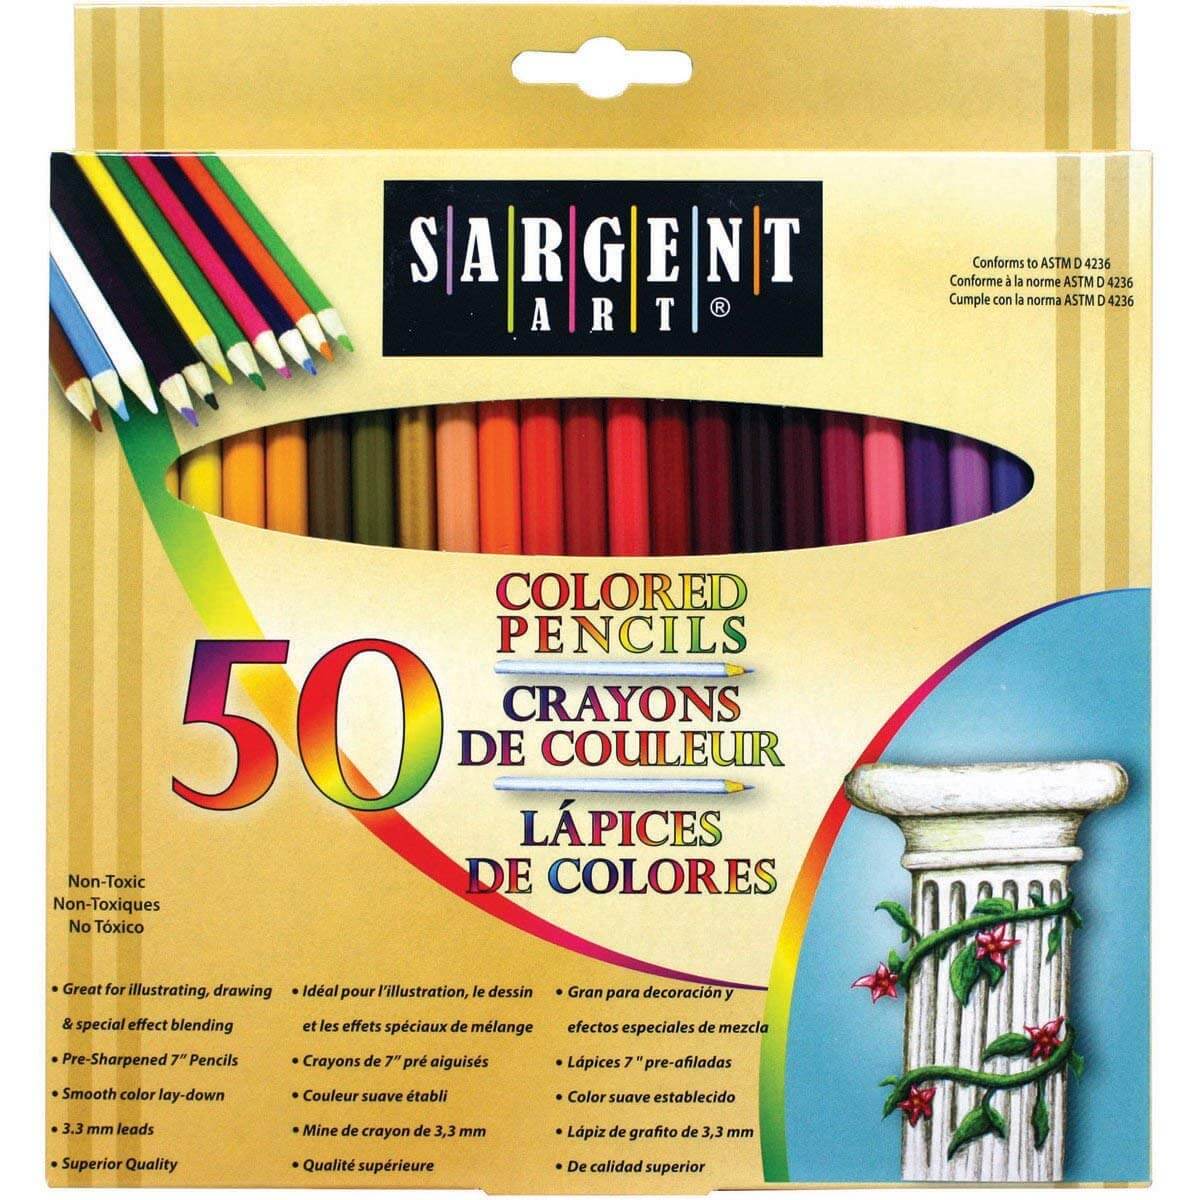 SJ STAR-JOY Gold Edition 120 Colored Pencils for Adult Coloring, Premier Color  Pencils for Layering Shading Blending, Holiday Gifts for Artist Drawing,  Oil Based Colored Pencils